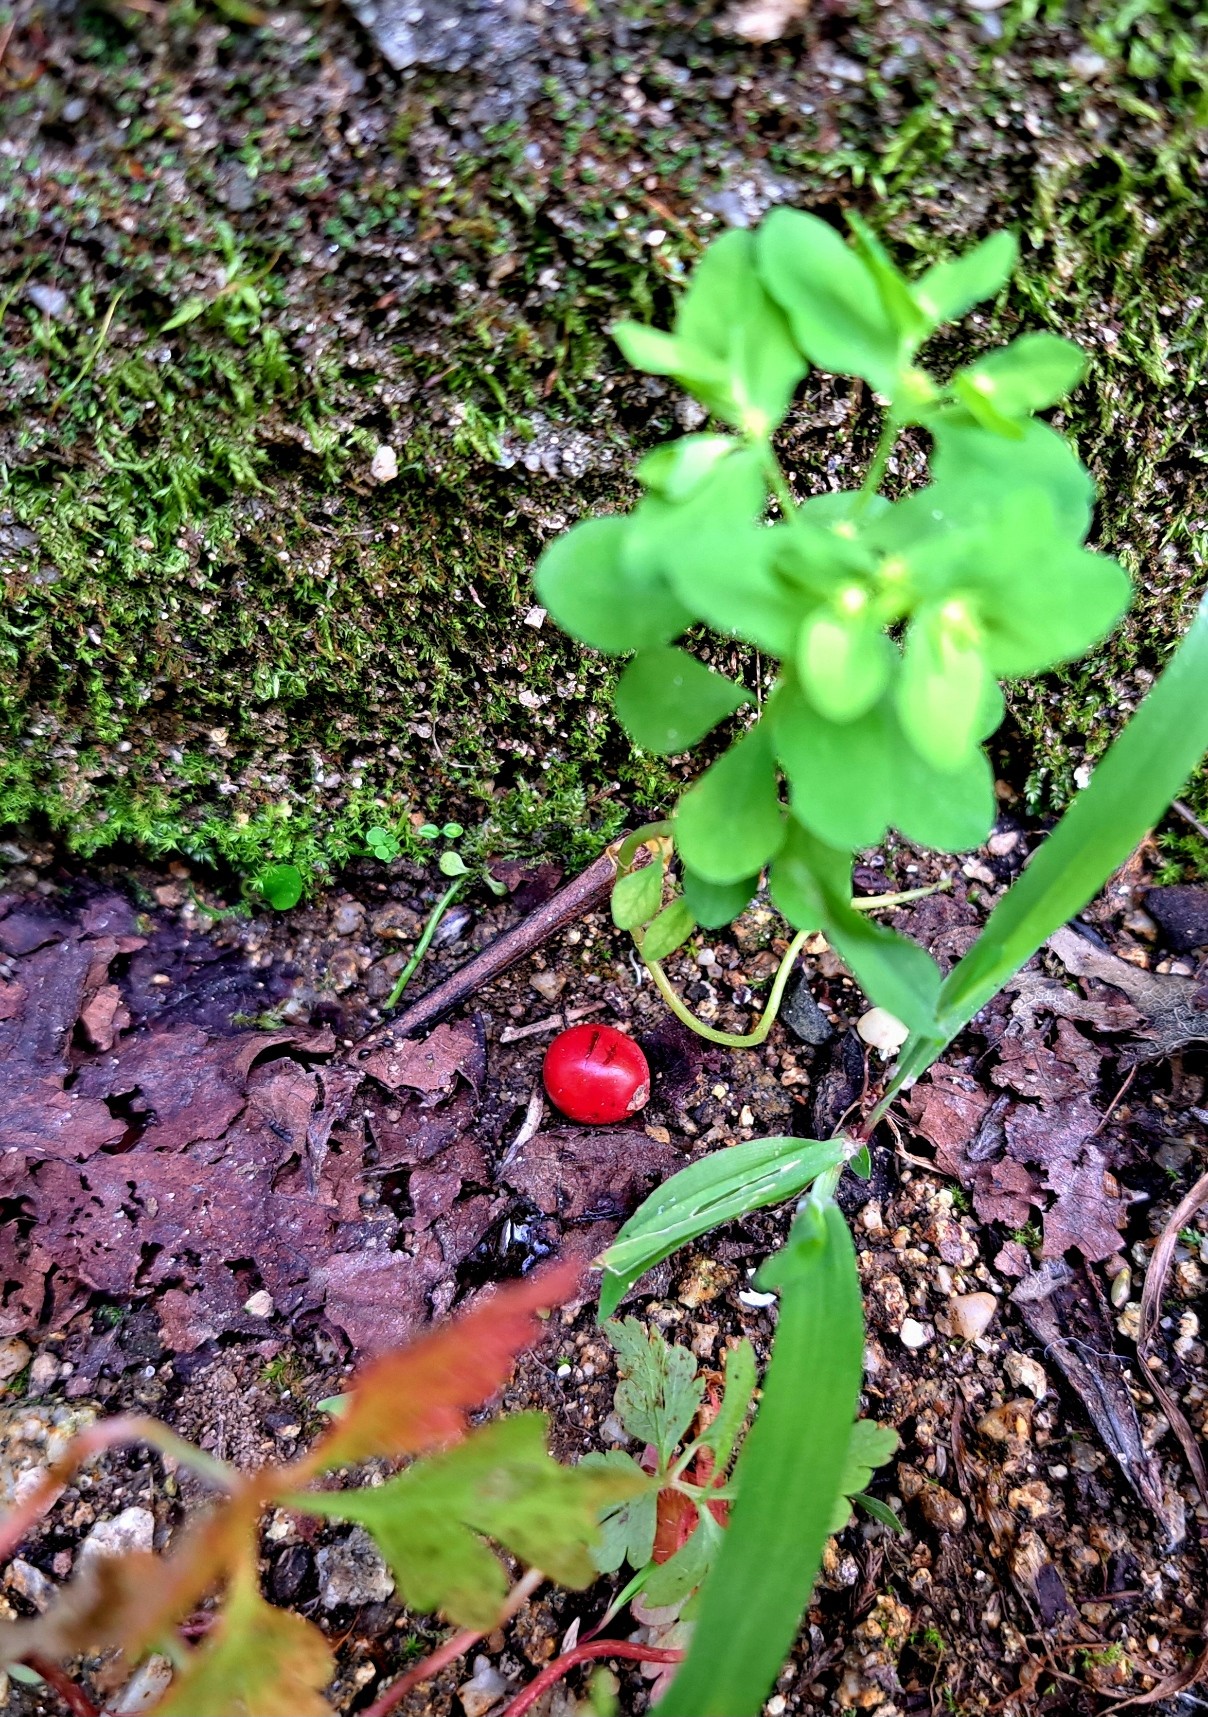 A red fruit from a holly tree dropped in the ground